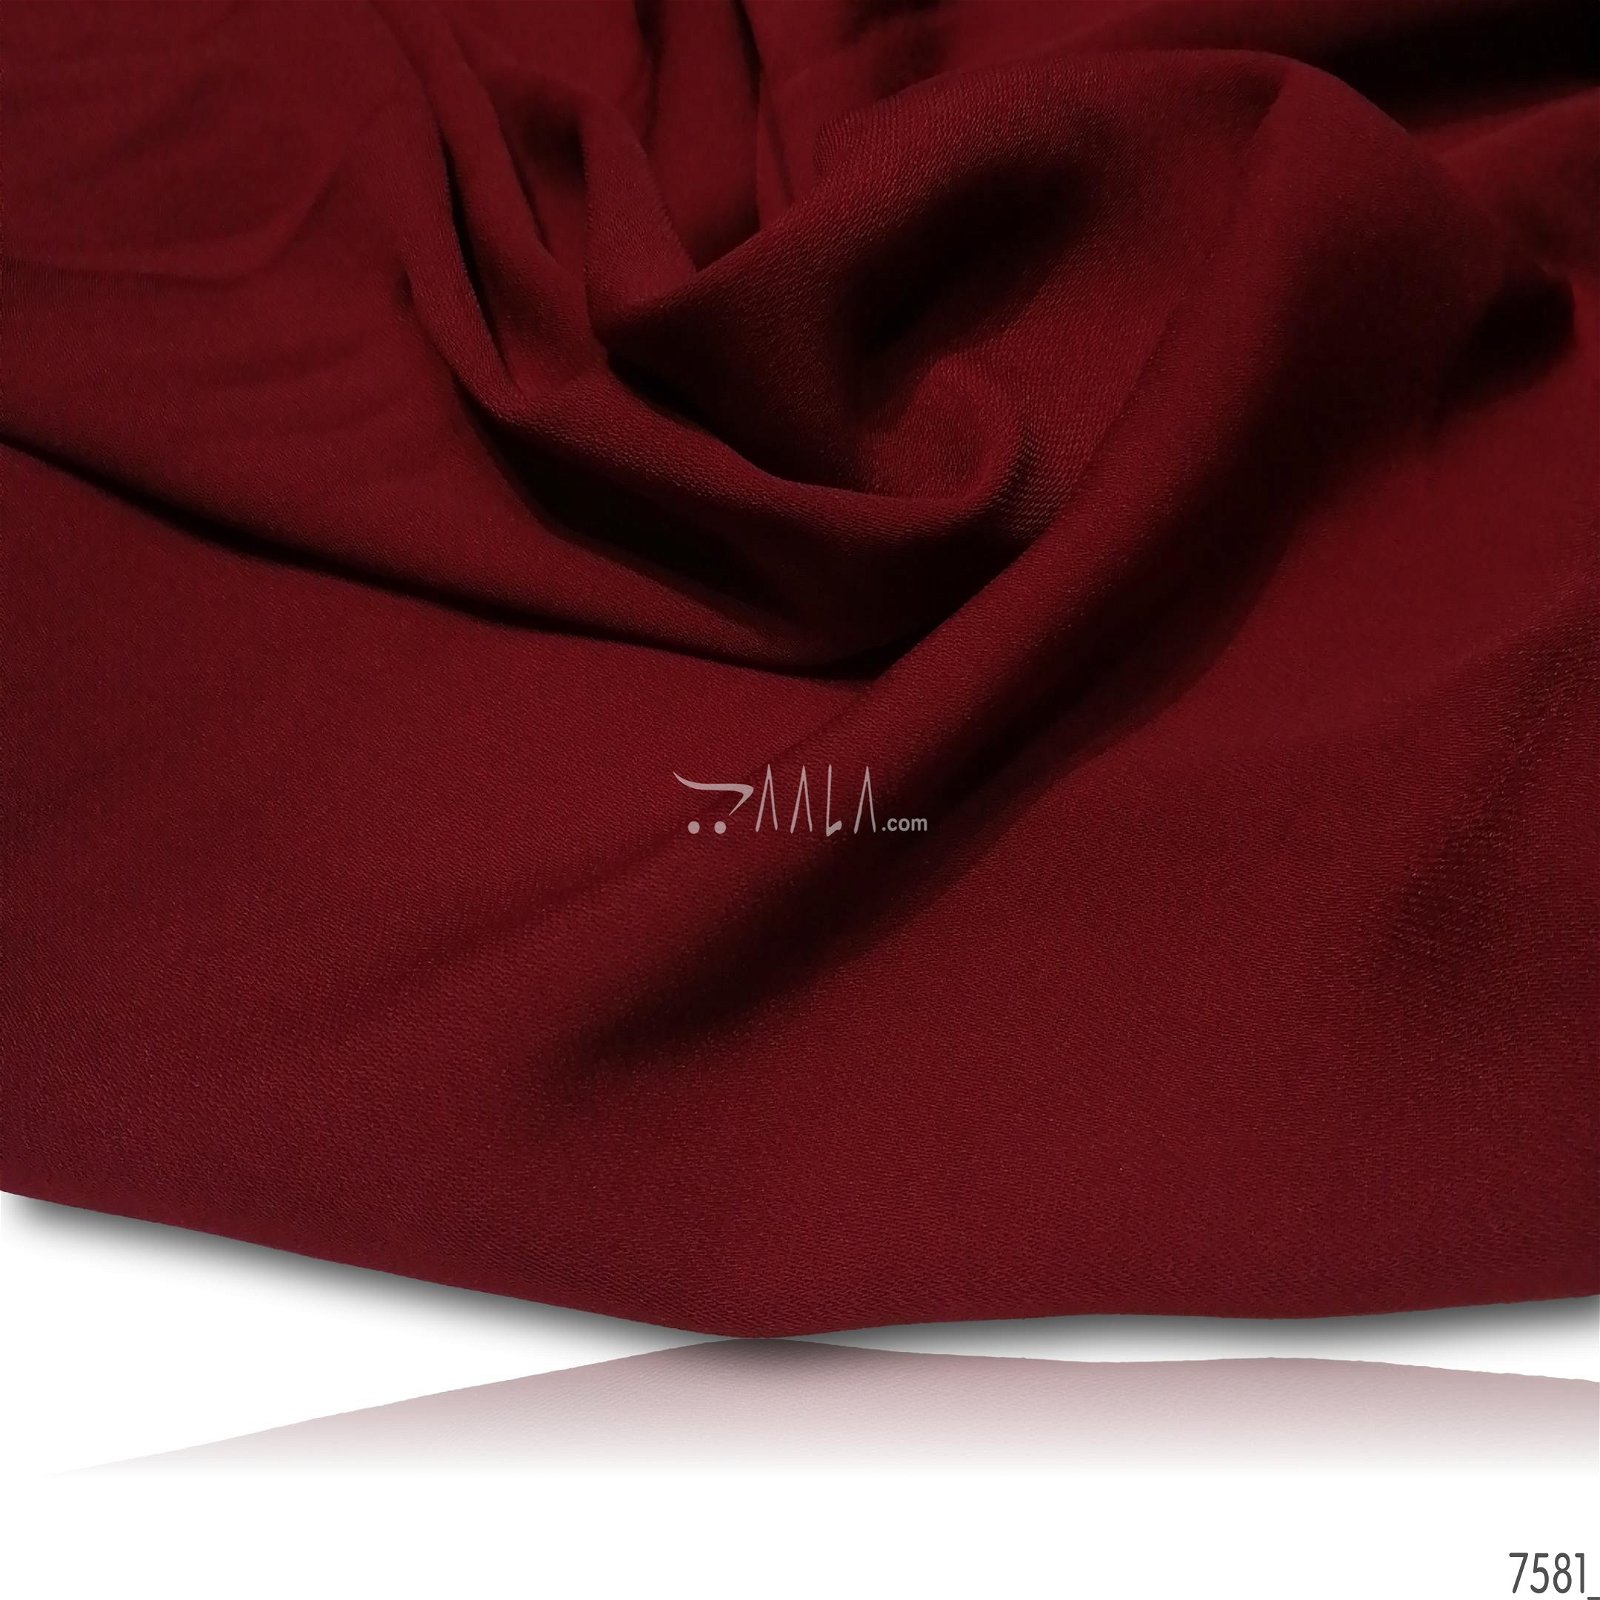 Moscow Double-Georgette Poly-ester 58-Inches MAROON Per-Metre #7581